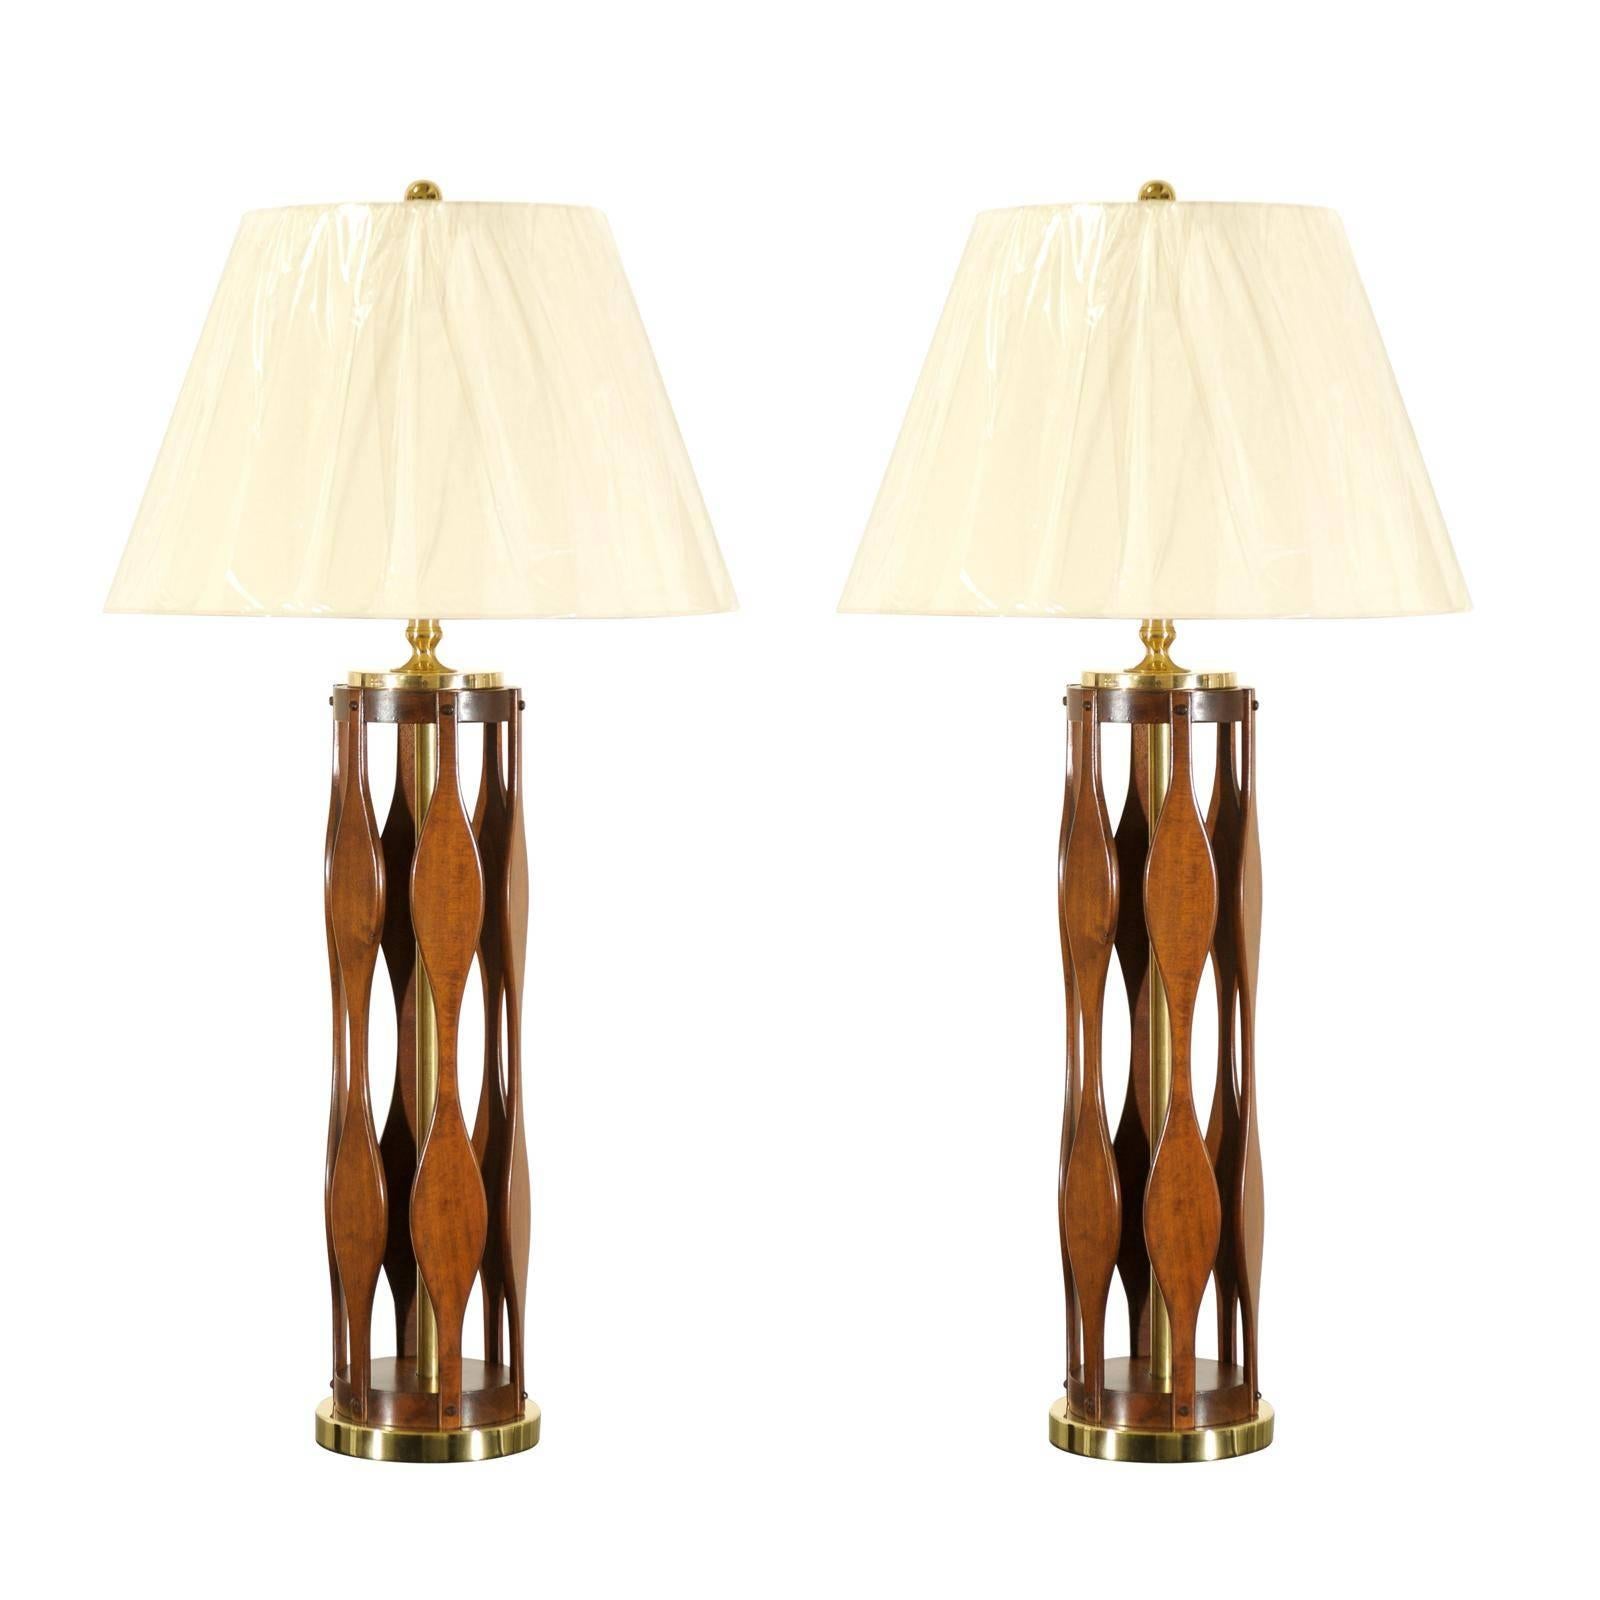 Restored Pair of Italian Modern Lamps in Walnut and Brass